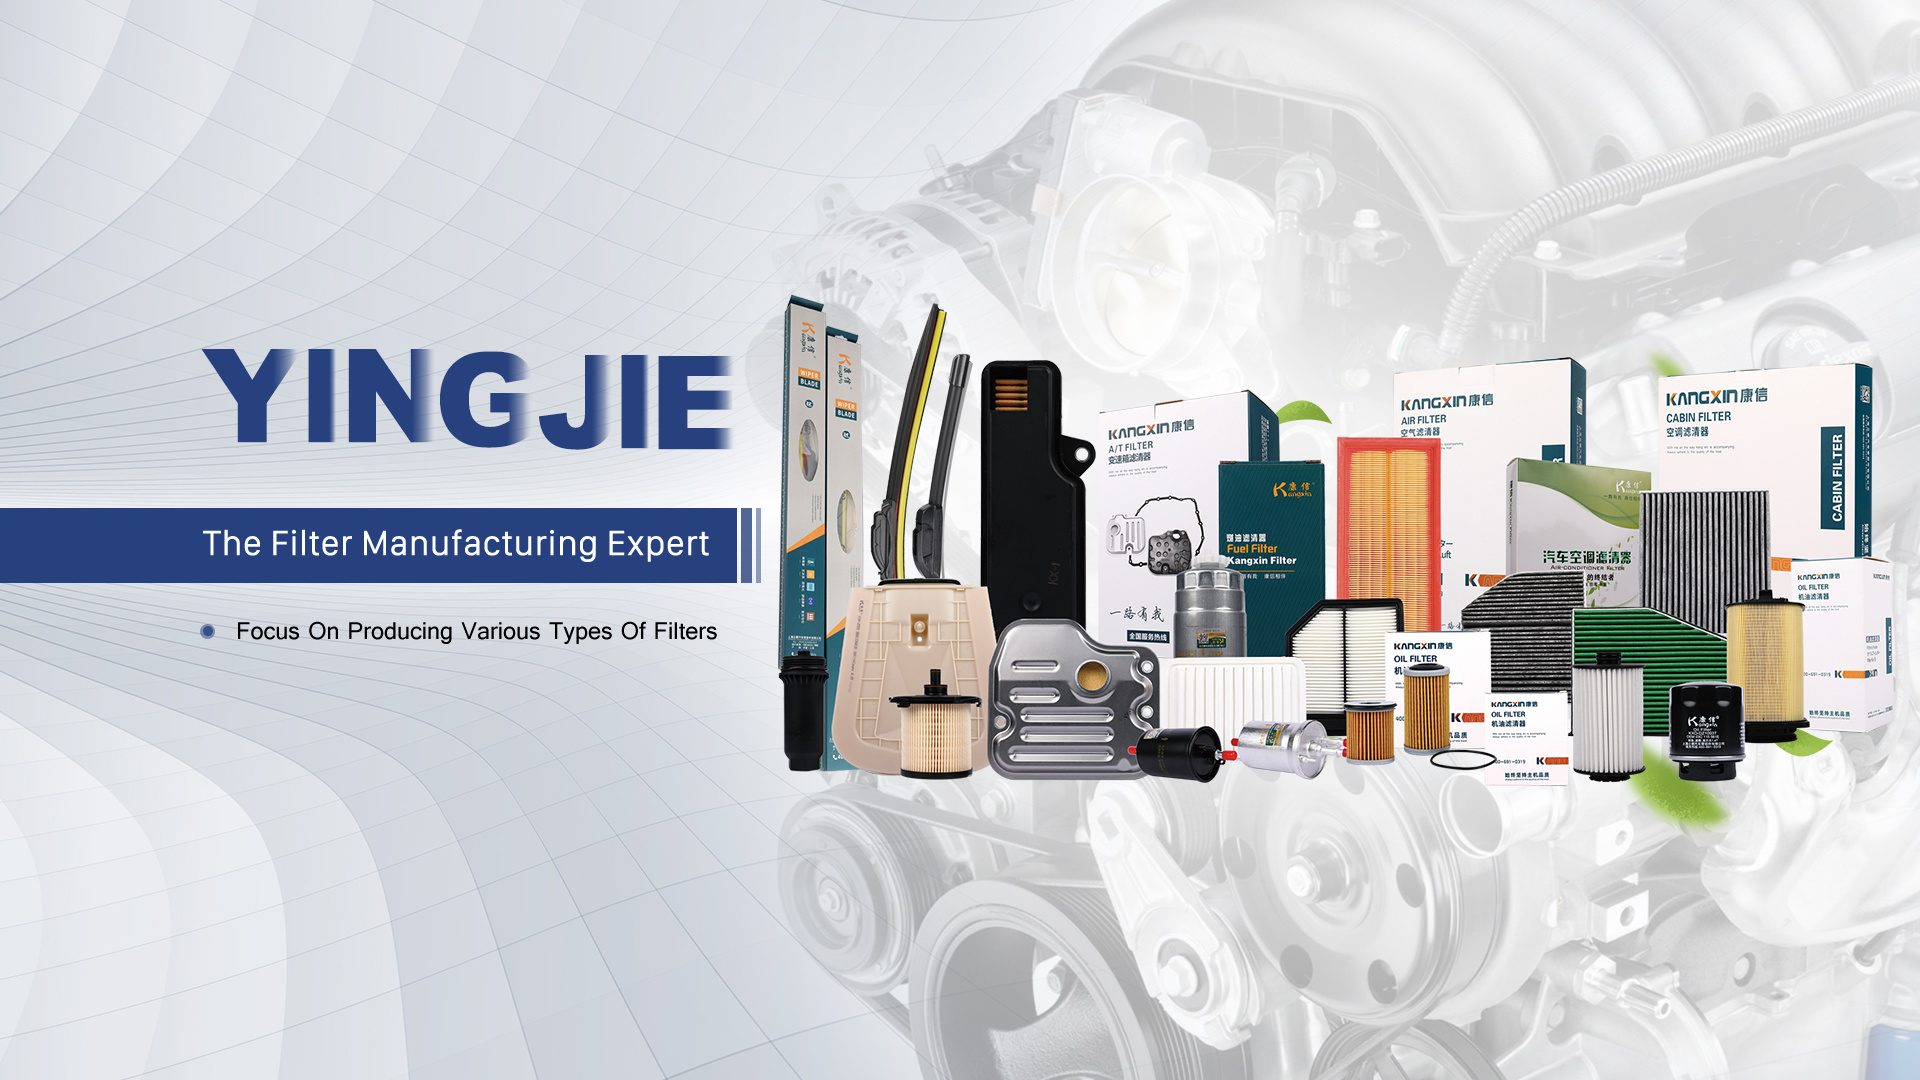 YINGJIE<br>The Filter Manufacturing Expert